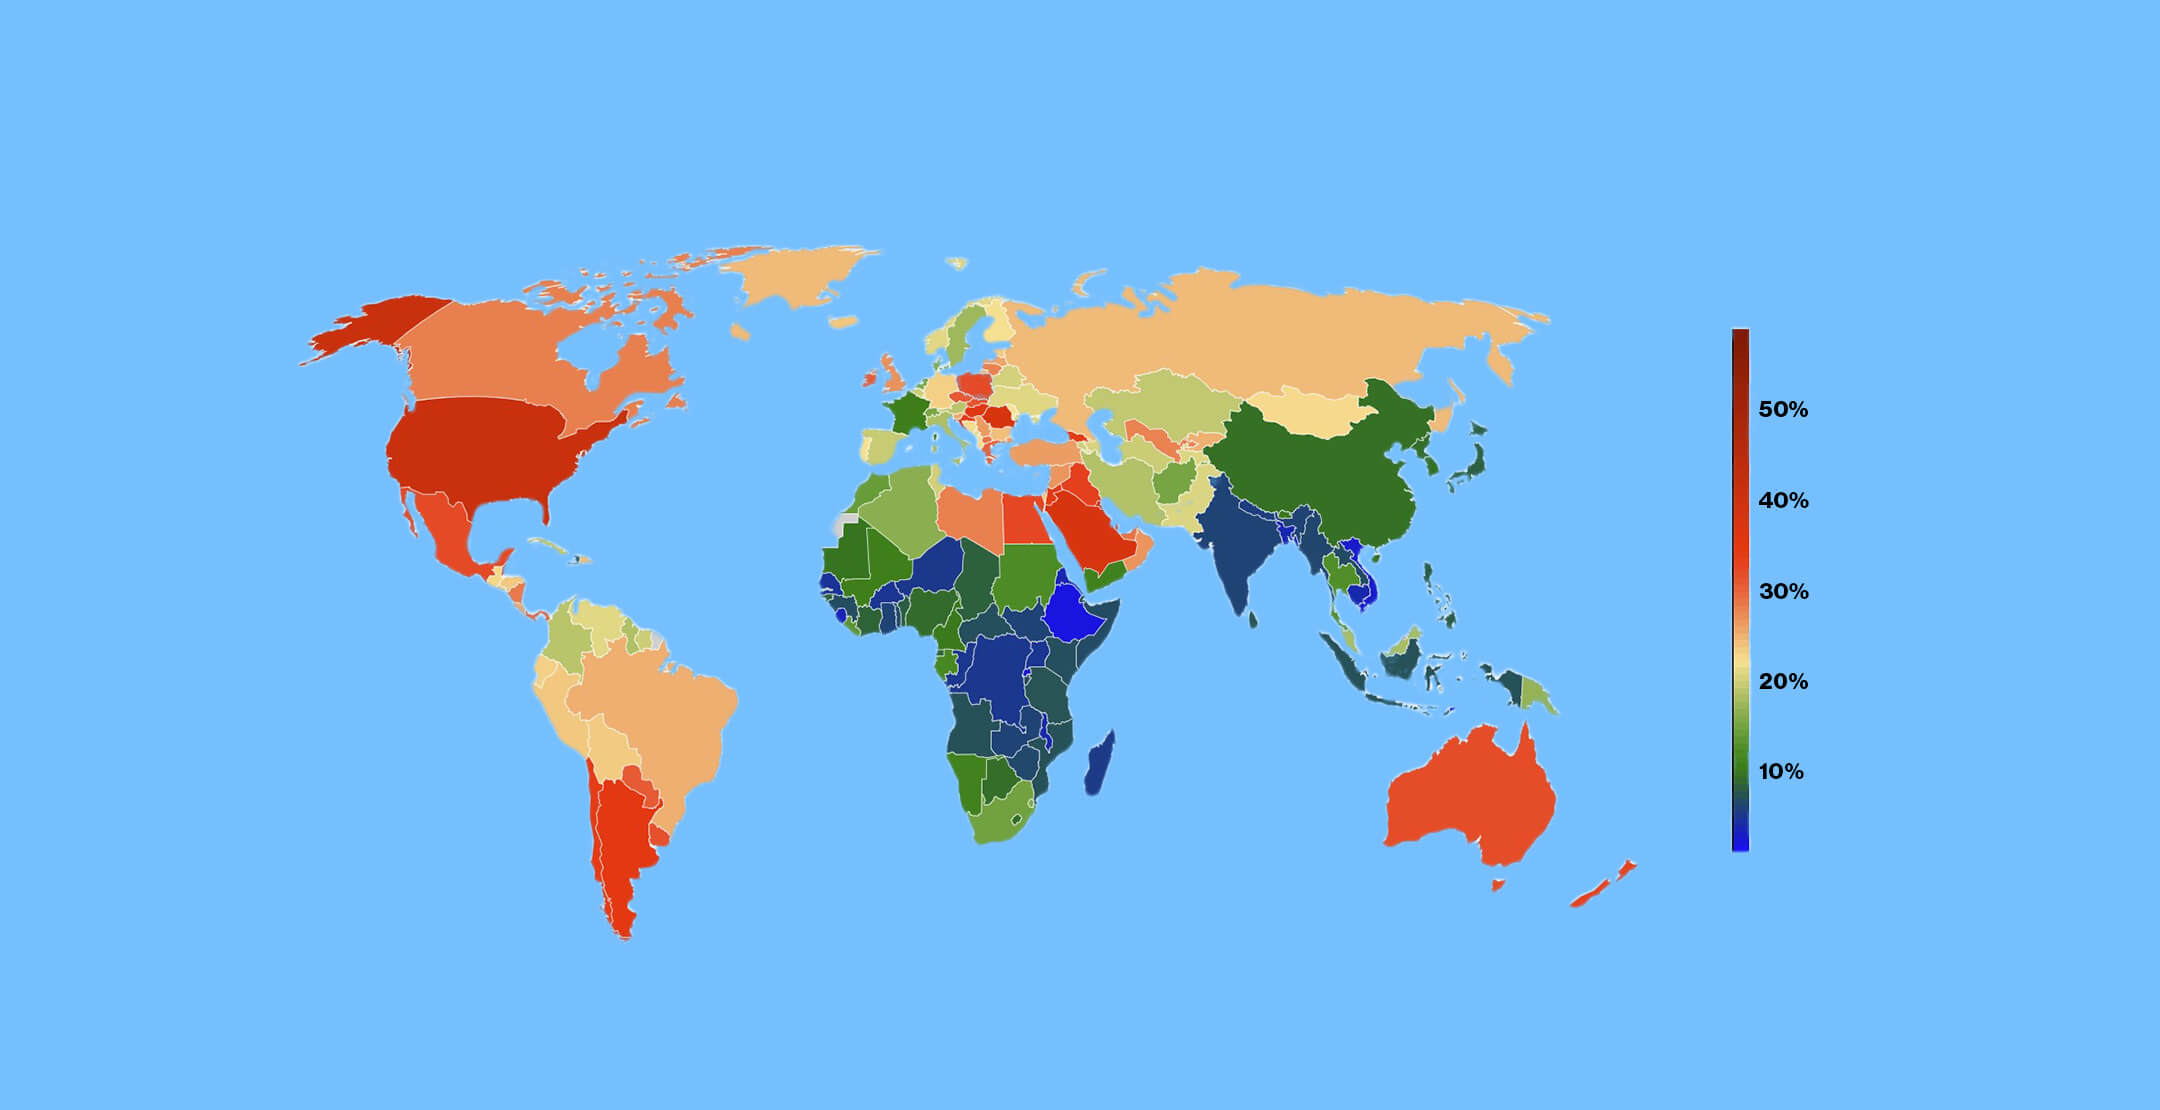 World Map color coded to show obesity averages per country